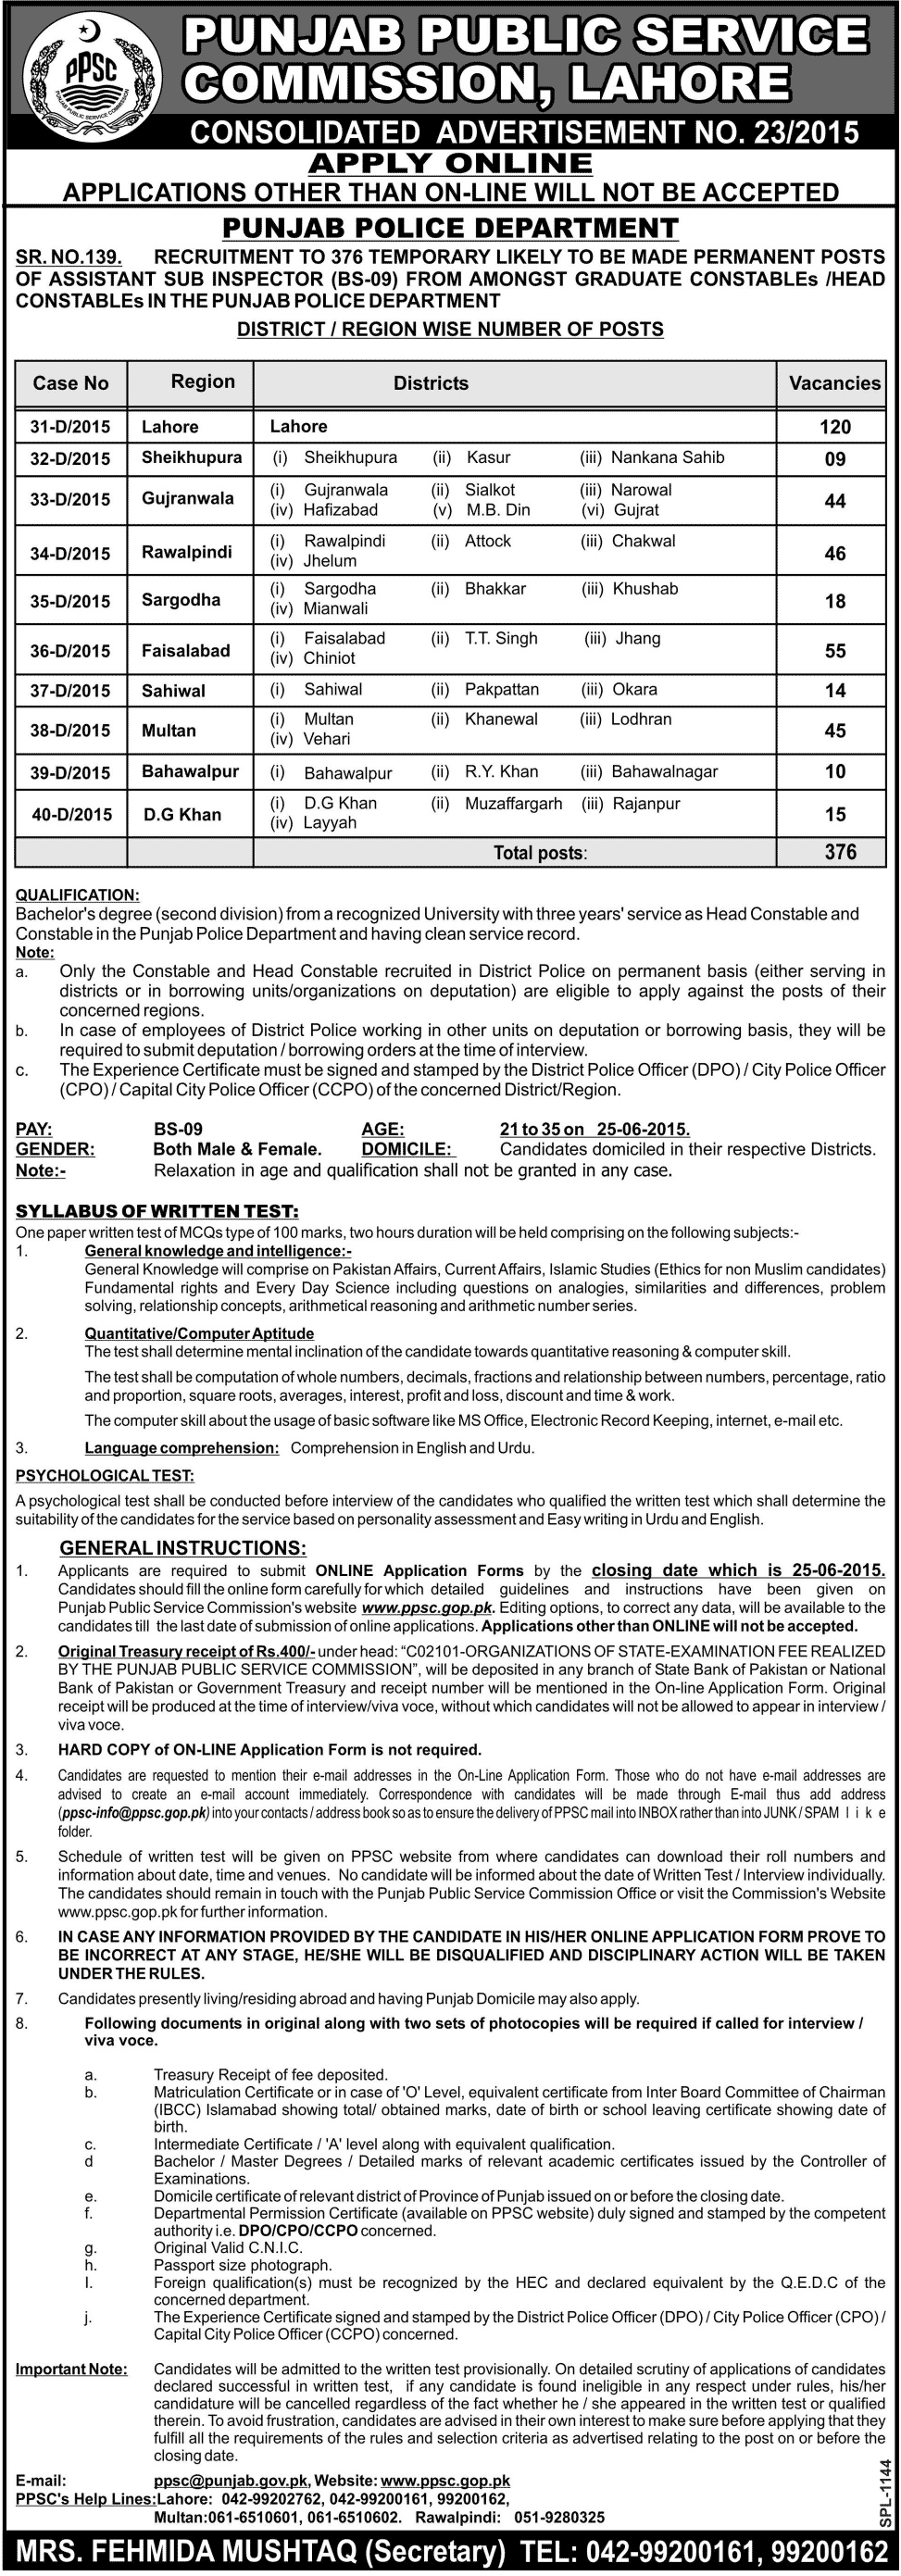 PPSC ASI Jobs In Punjab Police 2015 Apply Online Application Form